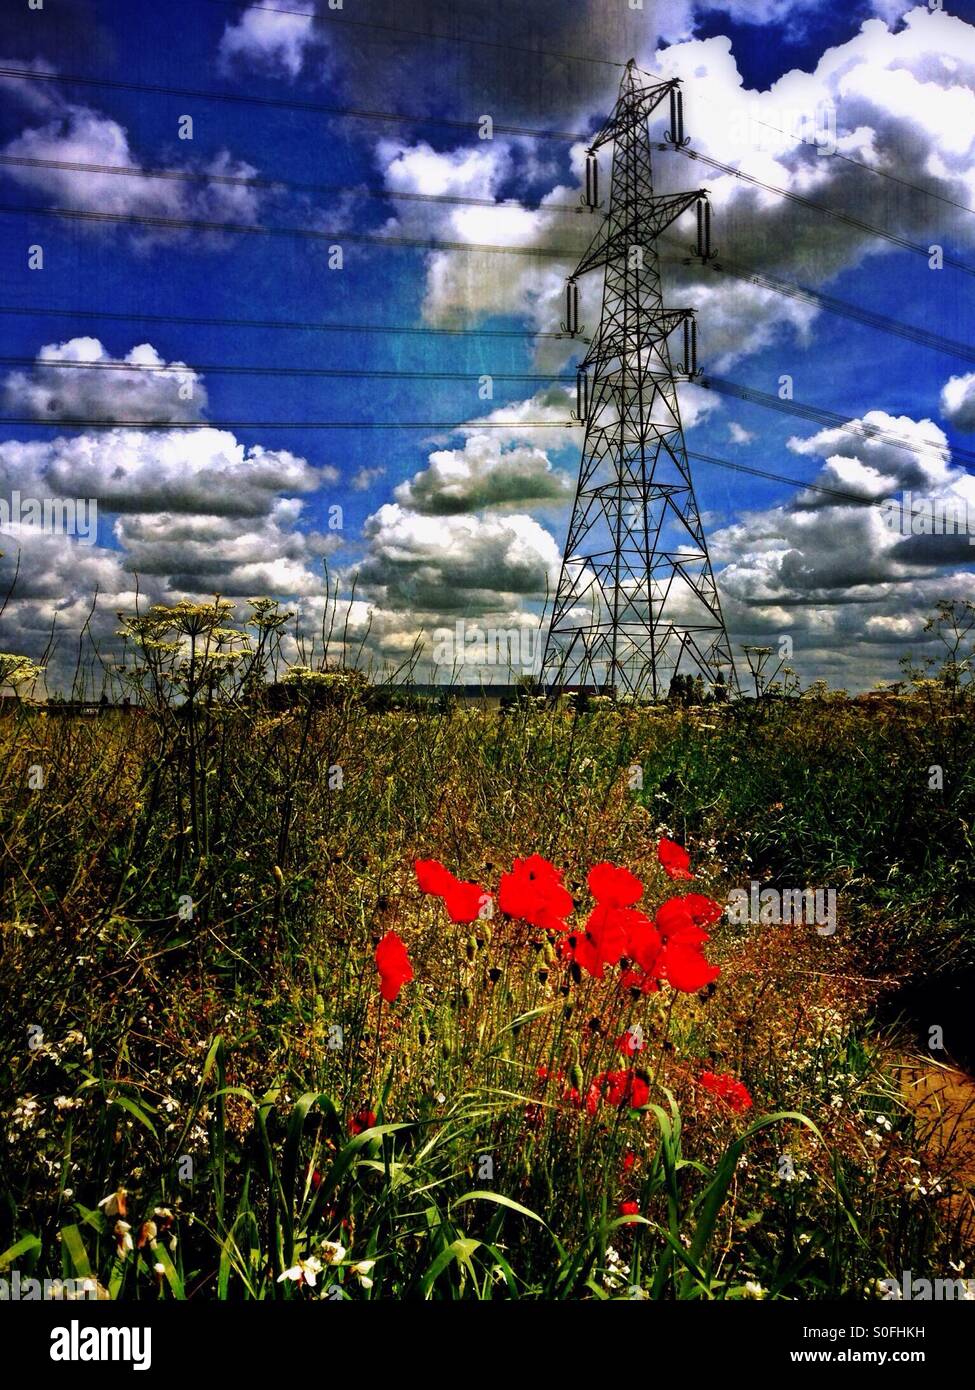 Poppies in a field with electricity pylon in background. Eaton Socon, Cambridgeshire, England. Stock Photo